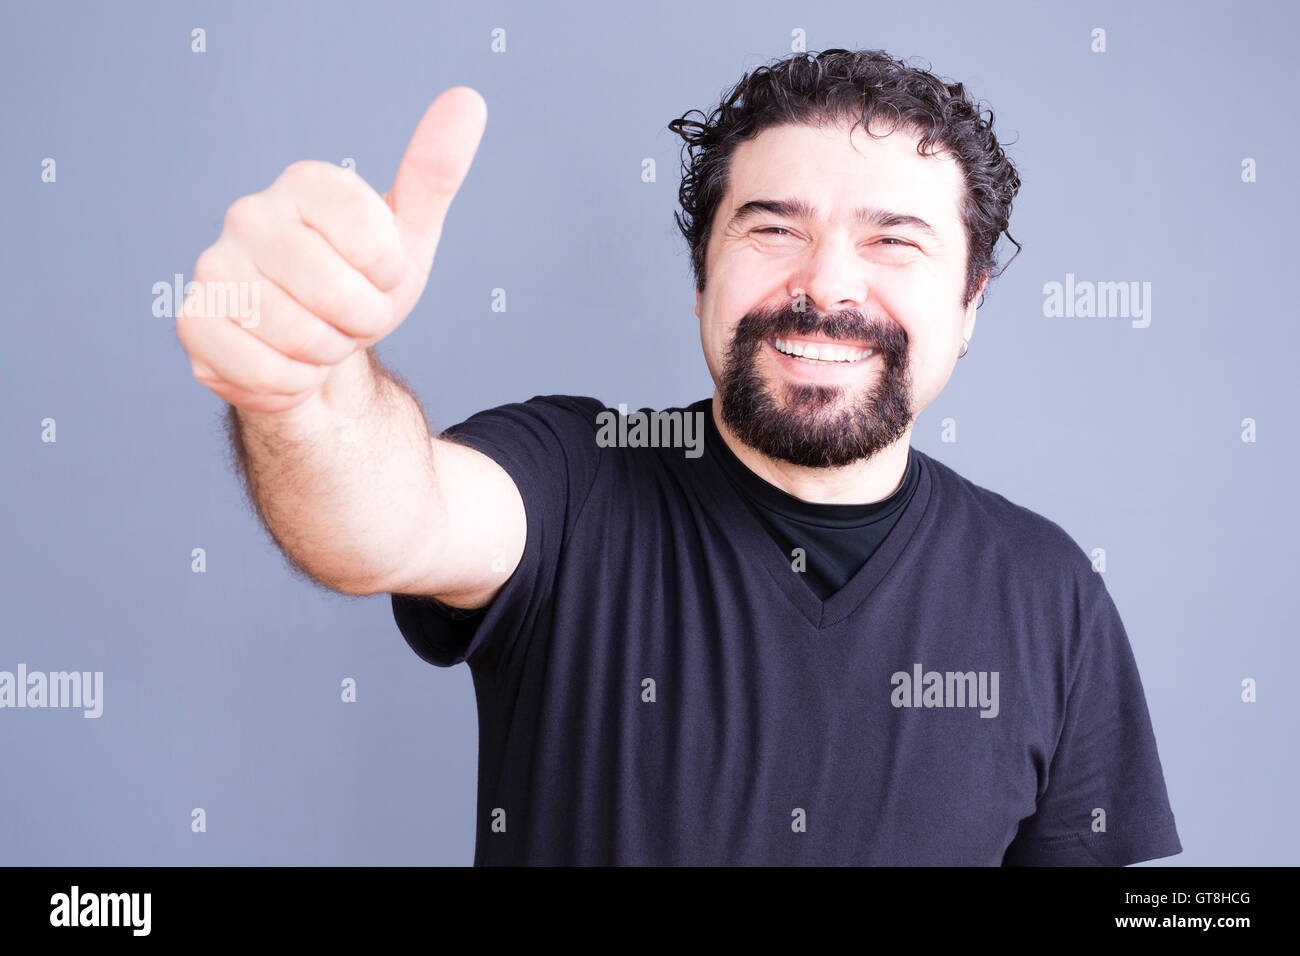 Middle aged bearded single man in black shirt sticking his hand outward with thumb up and big happy smile over gray background Stock Photo